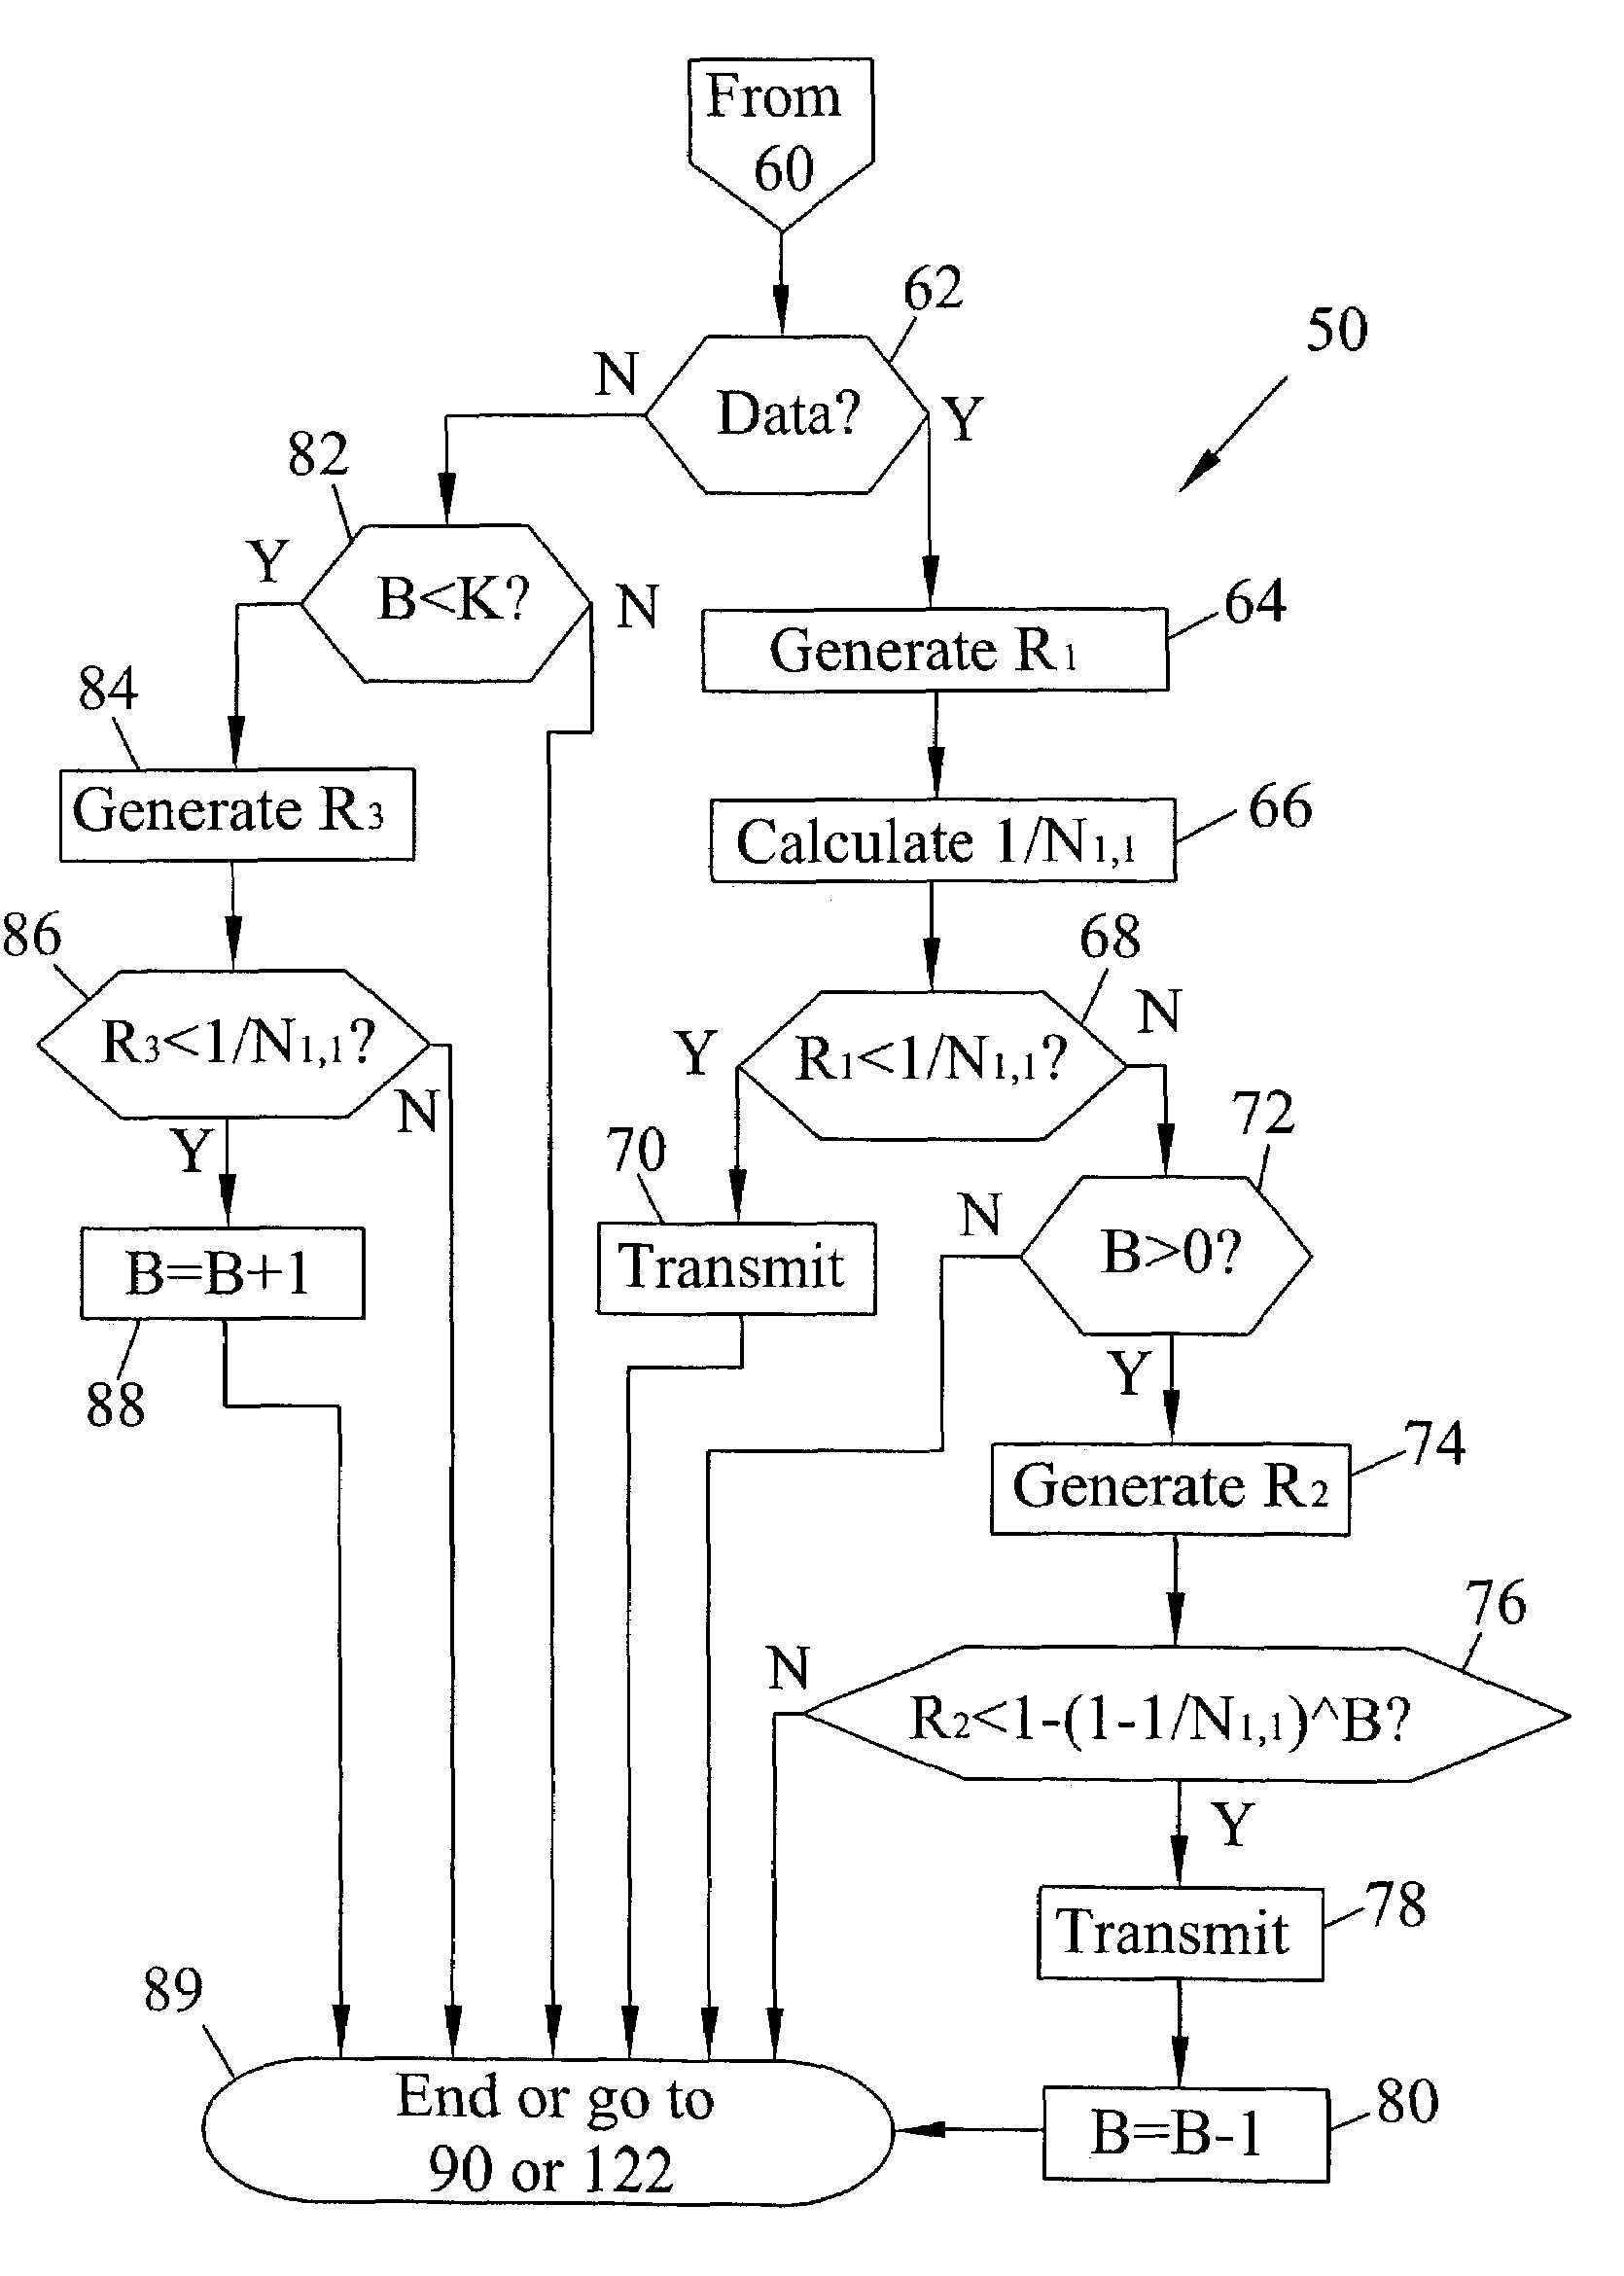 Stochastic unified multiple access to a communications channel